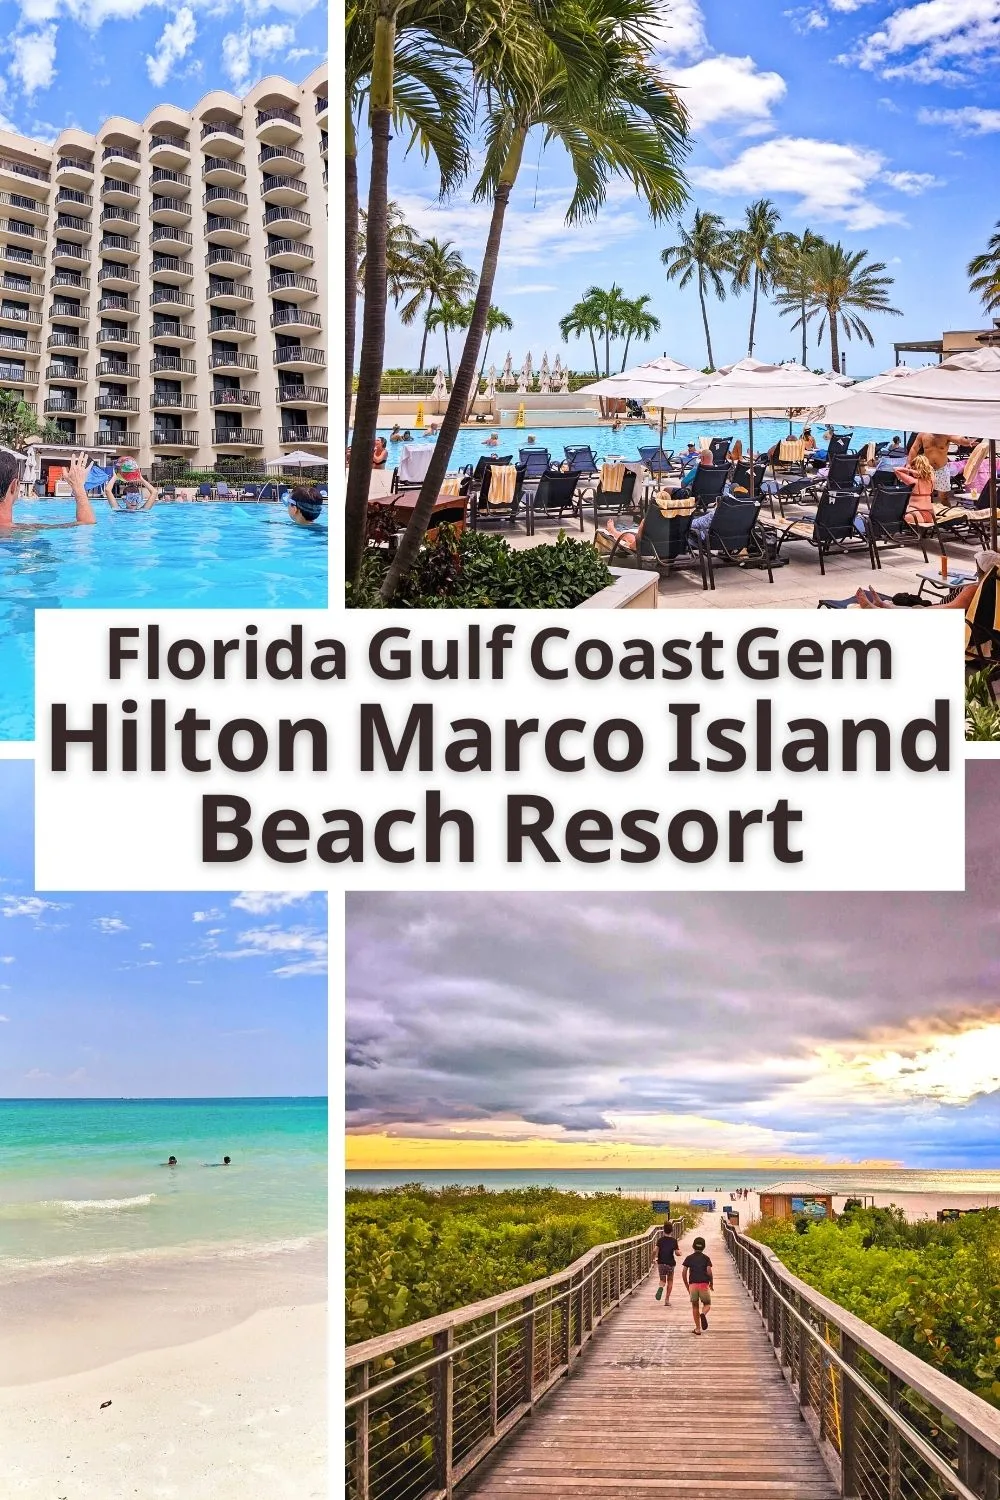 Review of the Hilton Marco Island Beach Resort on the Florida Gulf Coast. Near Everglades National Park and just south of Naples, this hotel is a great pick for a family beach vacation. Full details here!